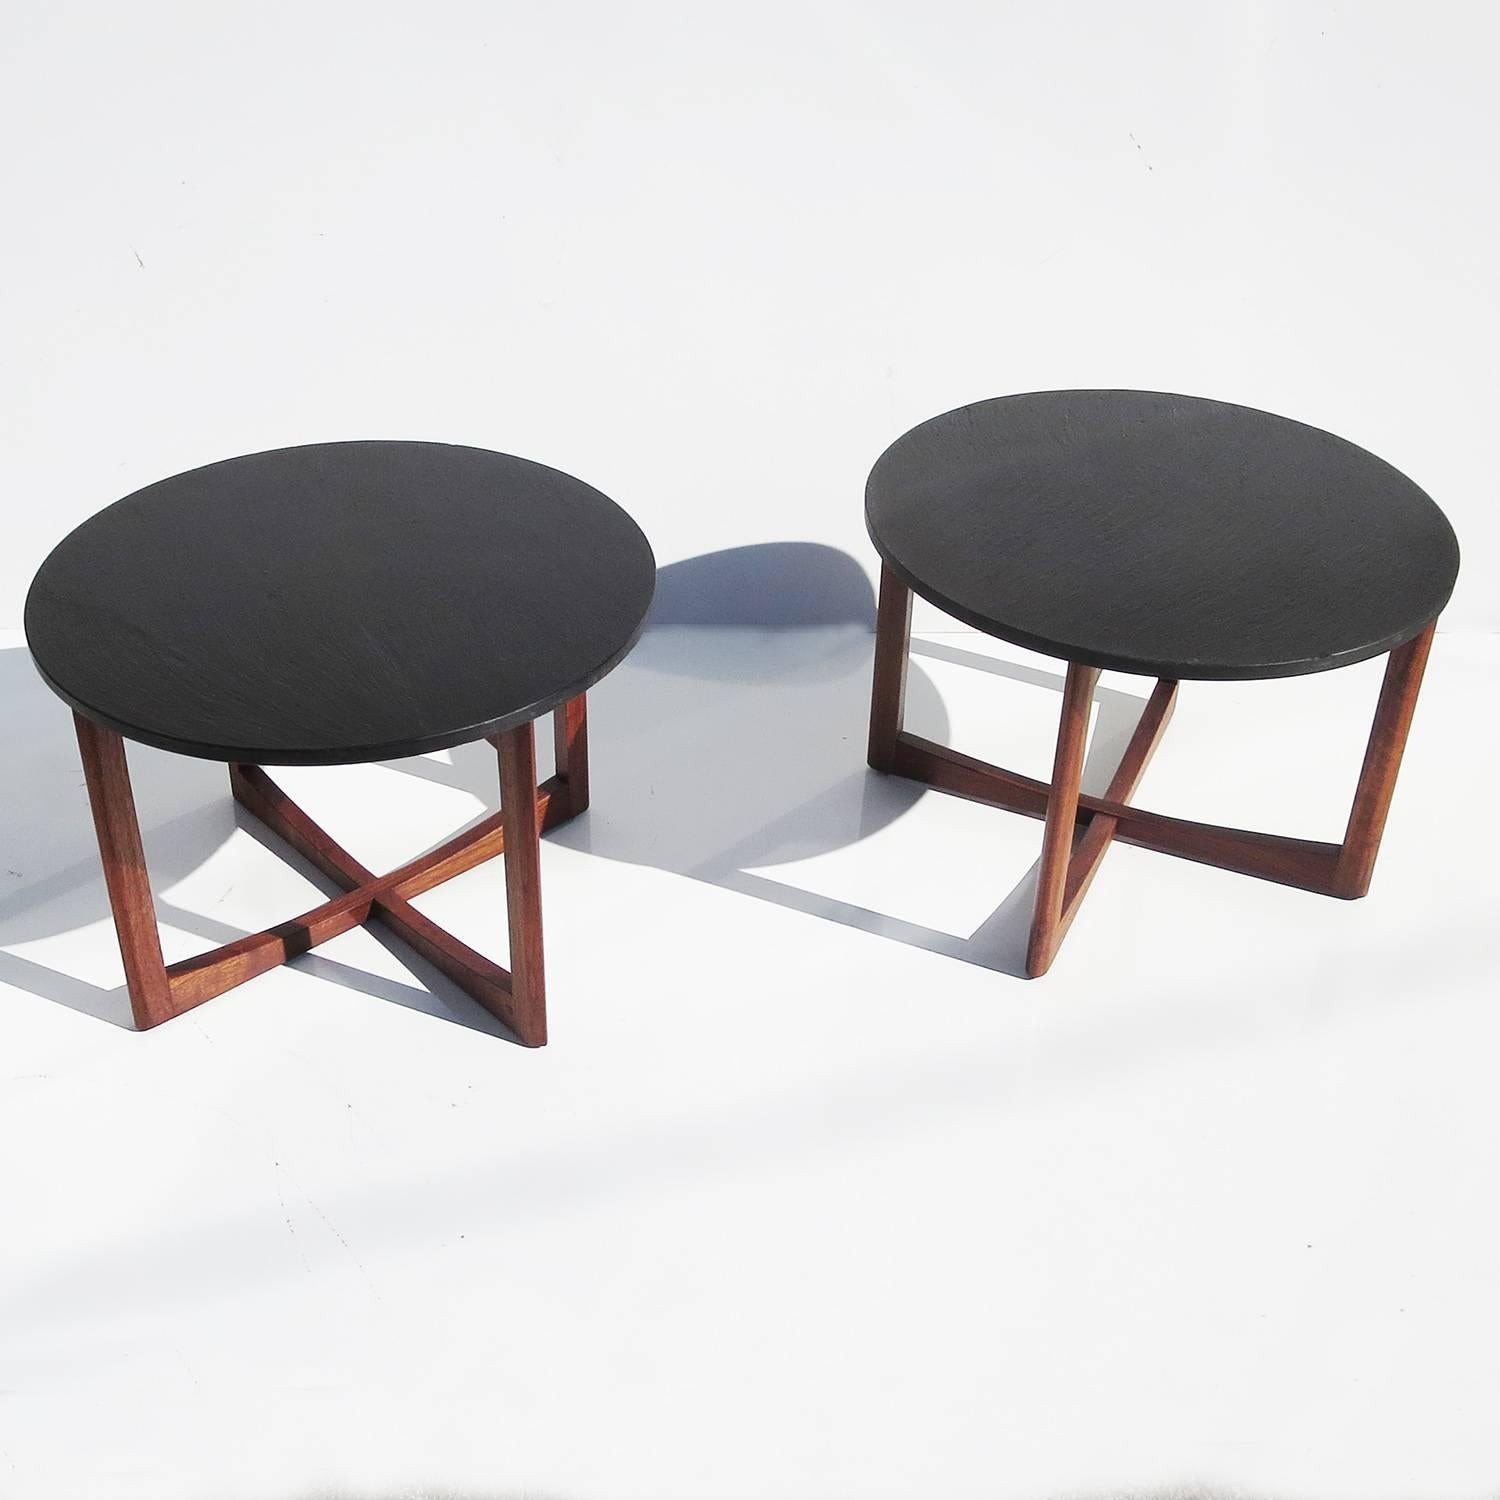 A very stylized pair by unknown designer. The tops are textured black slate, and the bases are satin finished solid walnut. The outside leg edges come to a pleasing taper. Both are in nice original condition.